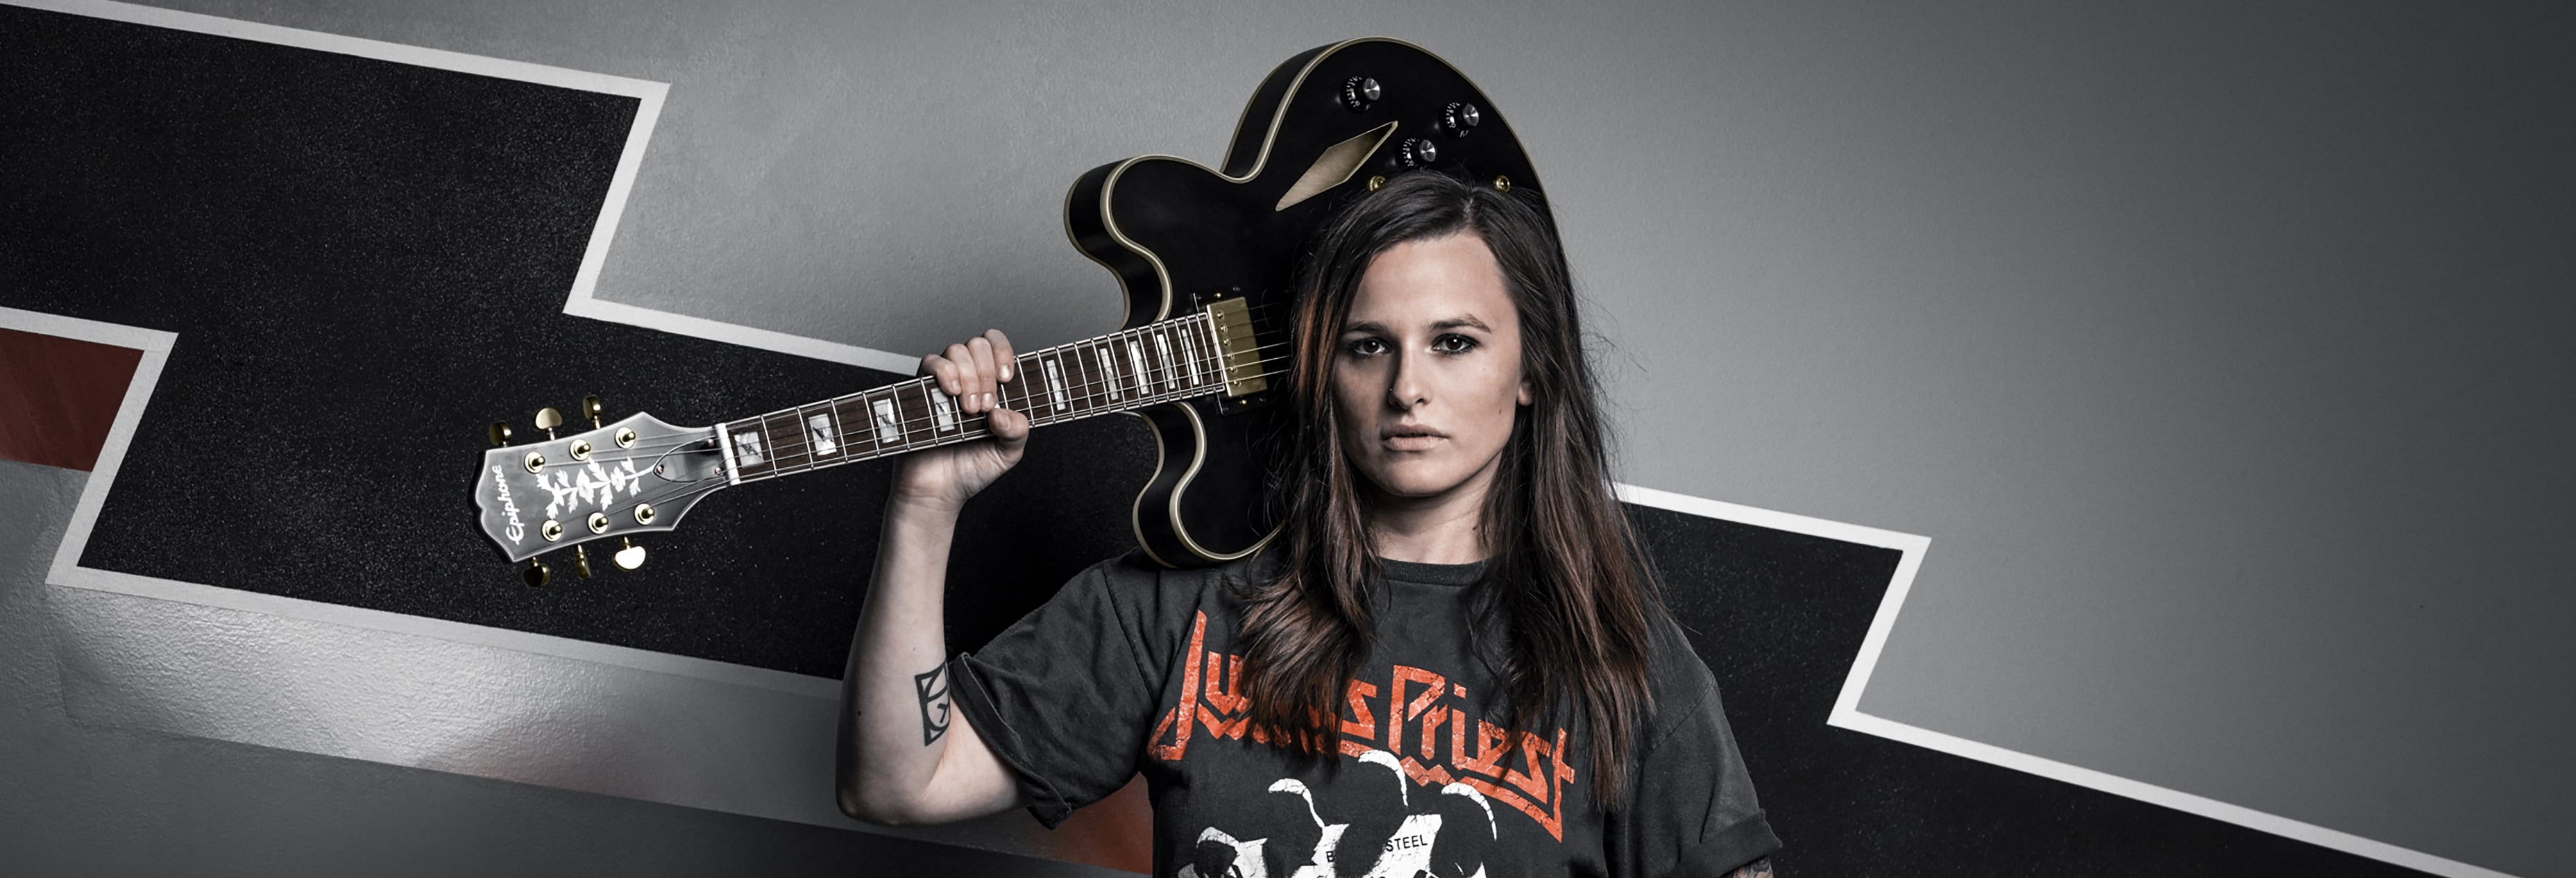 Emily Wolfe Partners with Epiphone to Design the Signature Guitar of Her Dreams